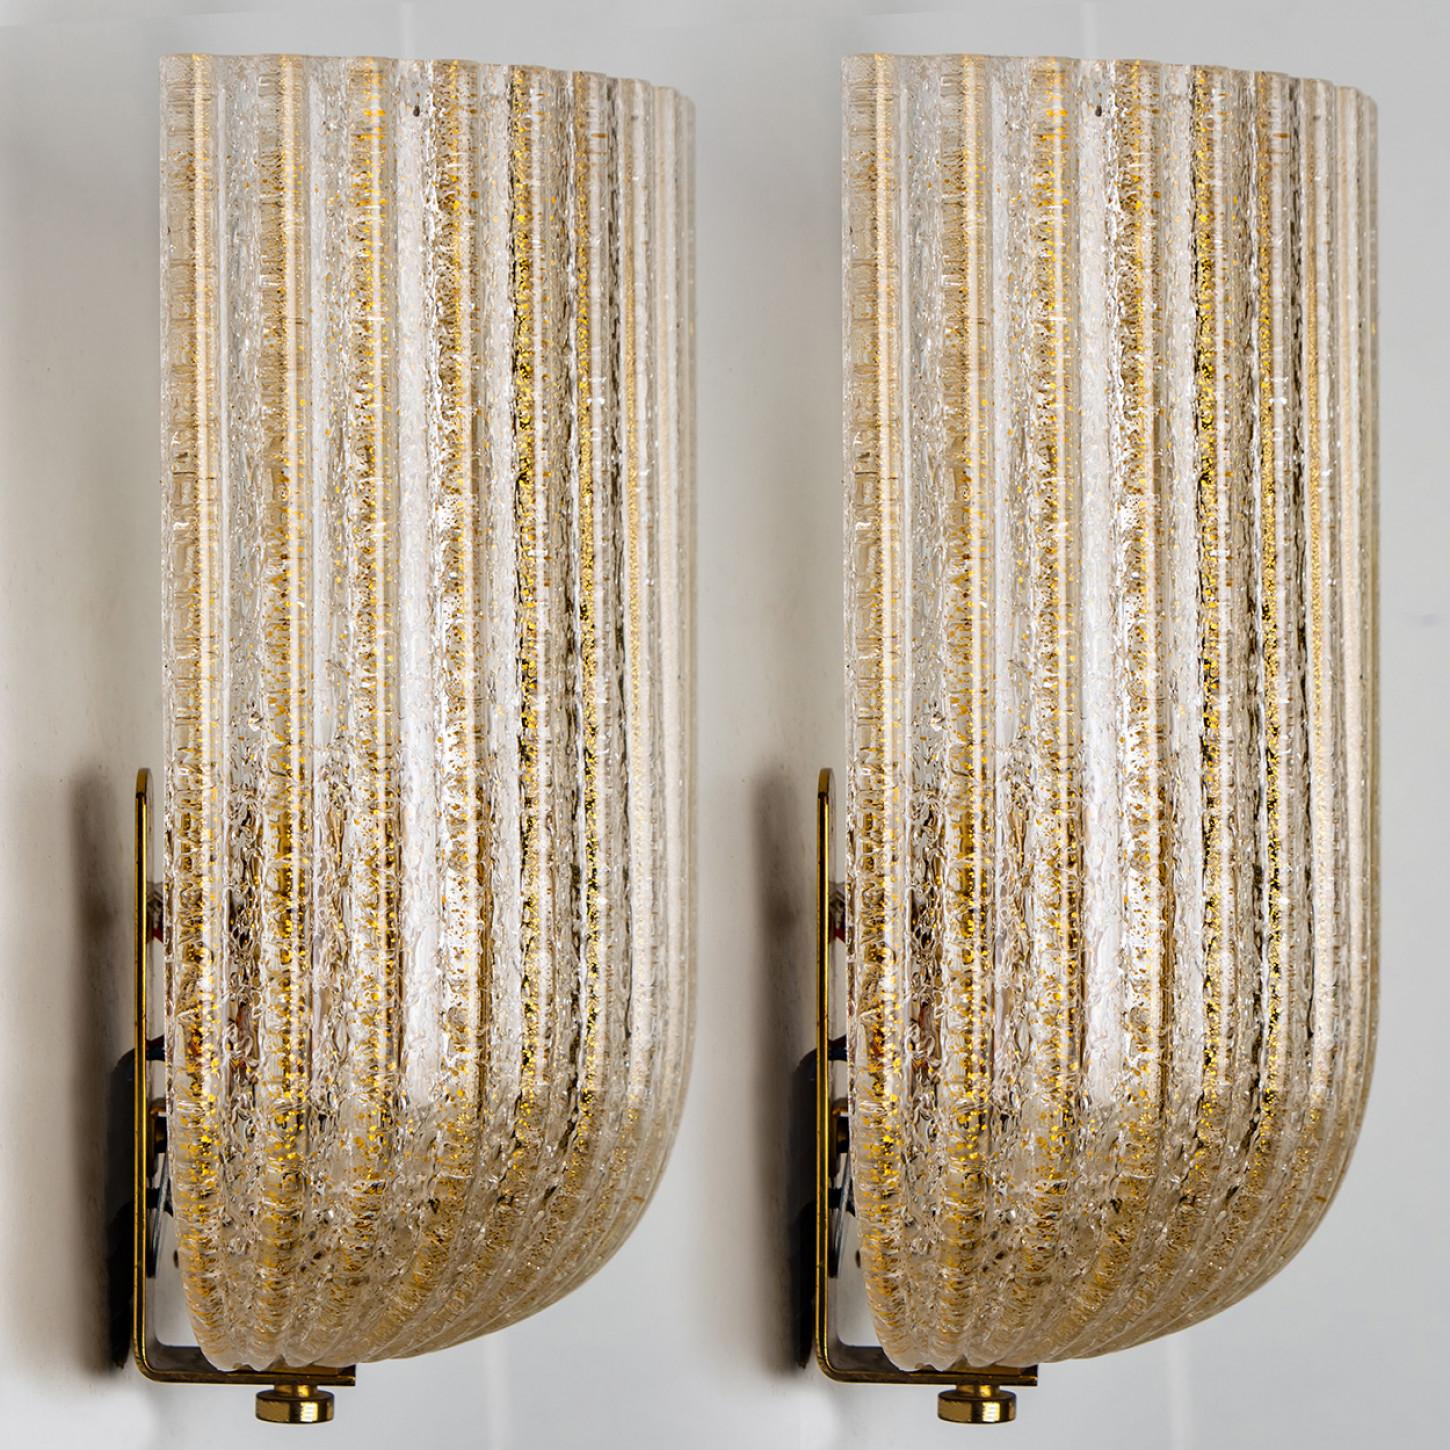 1 of 2 Fluted Murano Glass Wall Sconces Barovier, Italy, 1960s For Sale 7